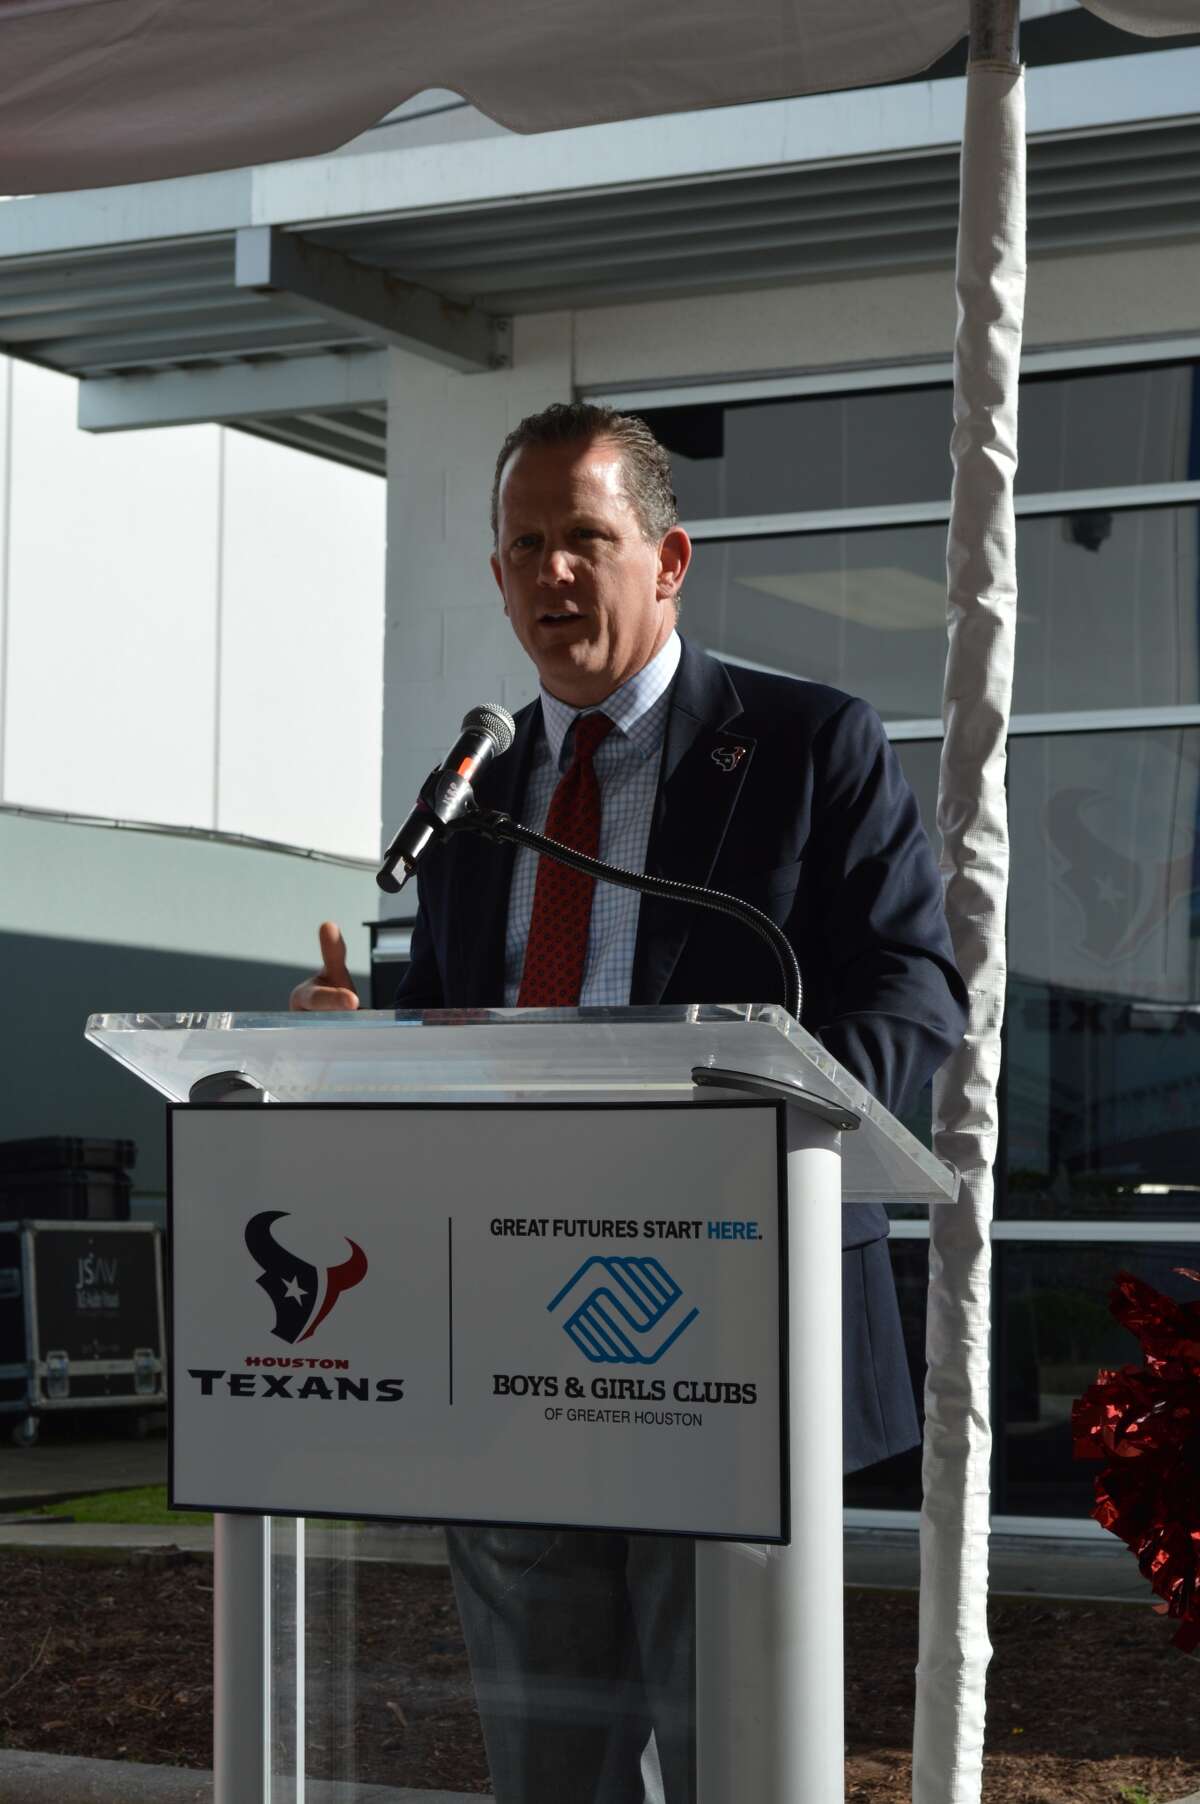 Texans team president Jamey Rootes during a press conference Thursday at Boys and Girls Club of Greater Houston to announce $750,000 pledge to build a new facility designed for teenagers.